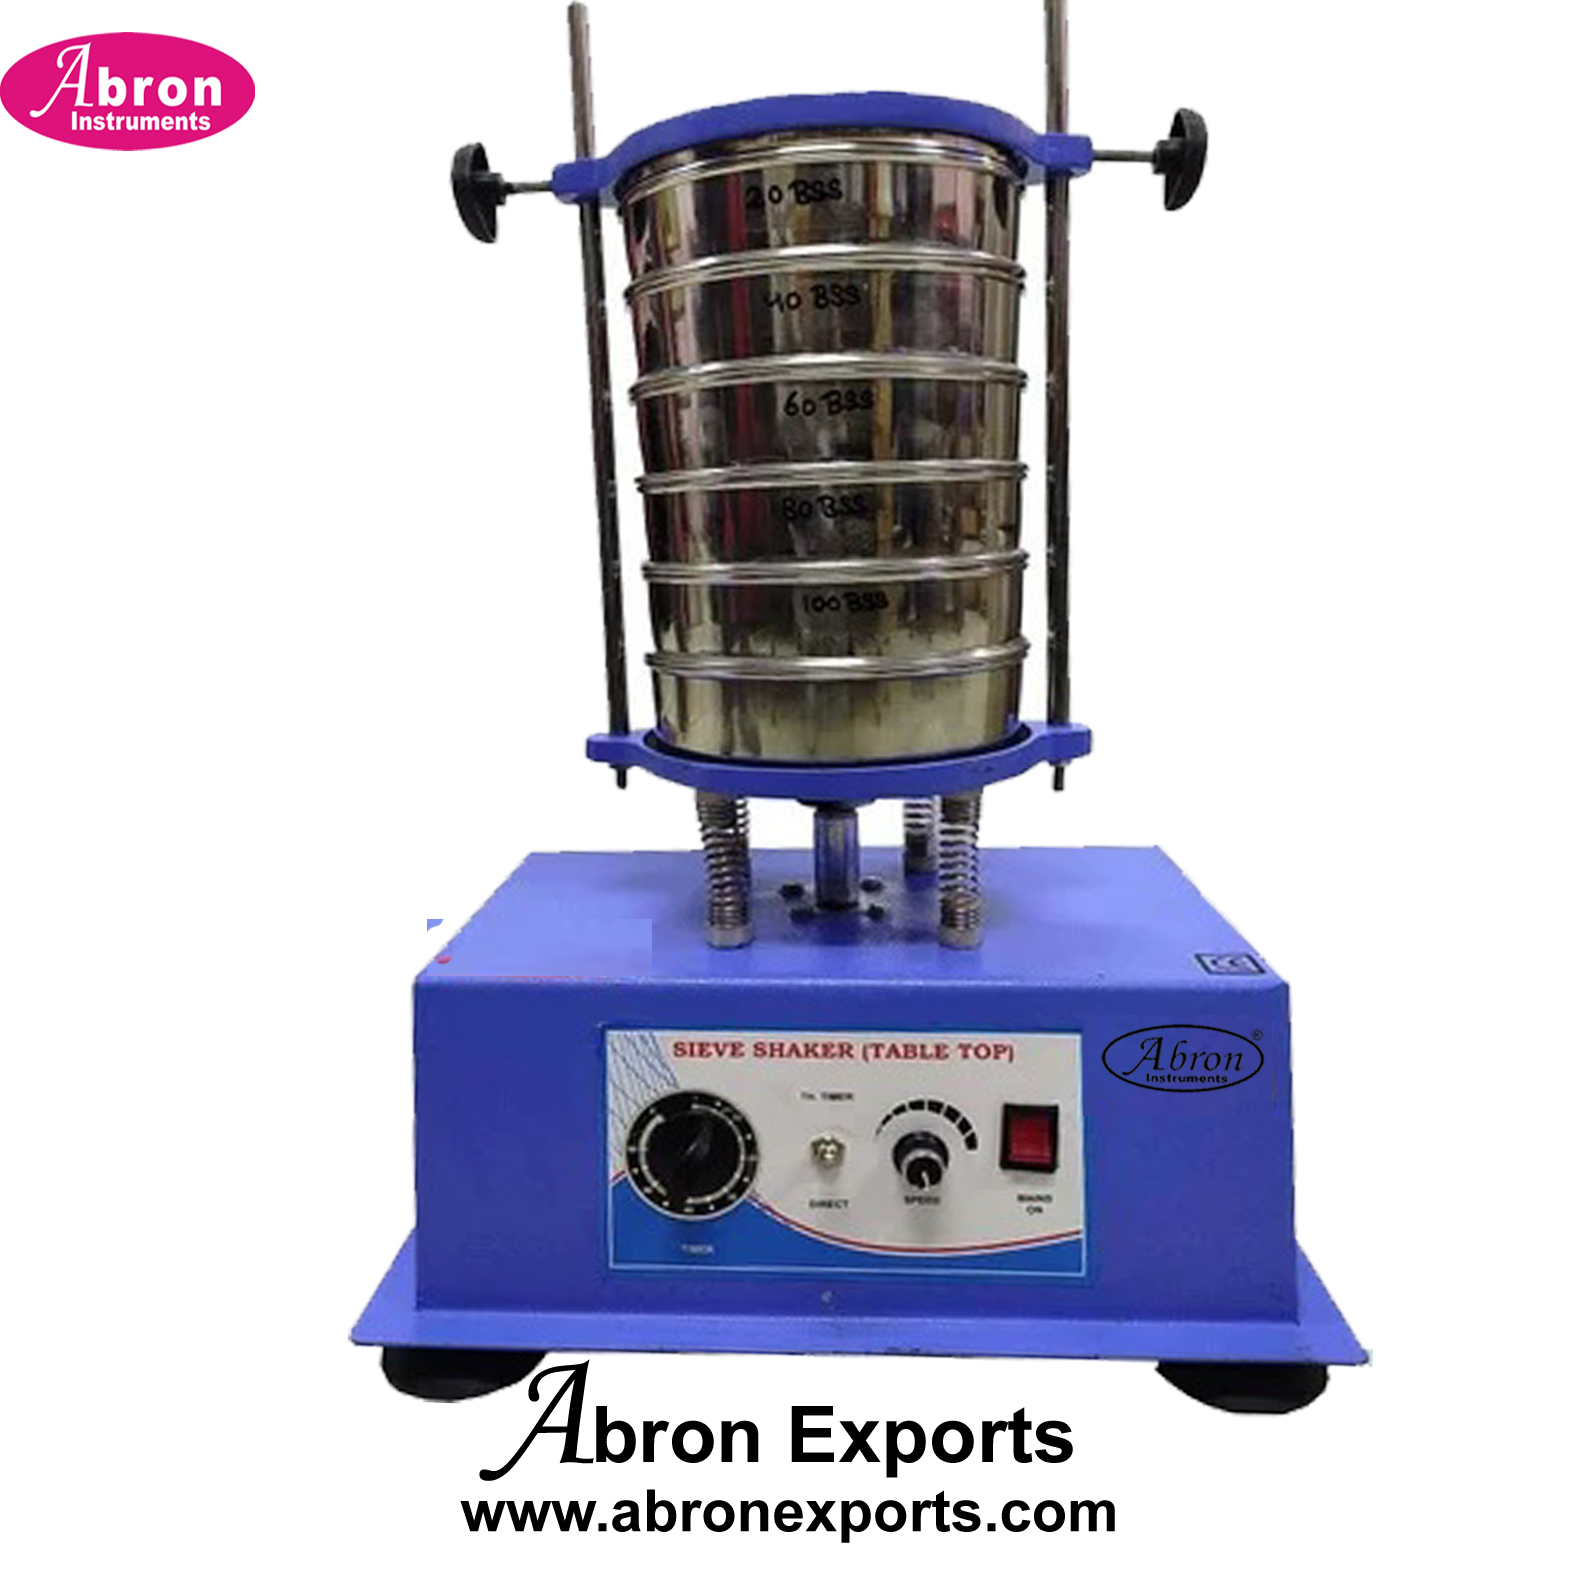 Sieves Shaker Electric Table Top With Speed Regulator And 6 Sieves Lid And Pan Set Soil Testing Pharmacy SieveSset 6+1 lid 1 Pan Set Abron ASI-170GT6 